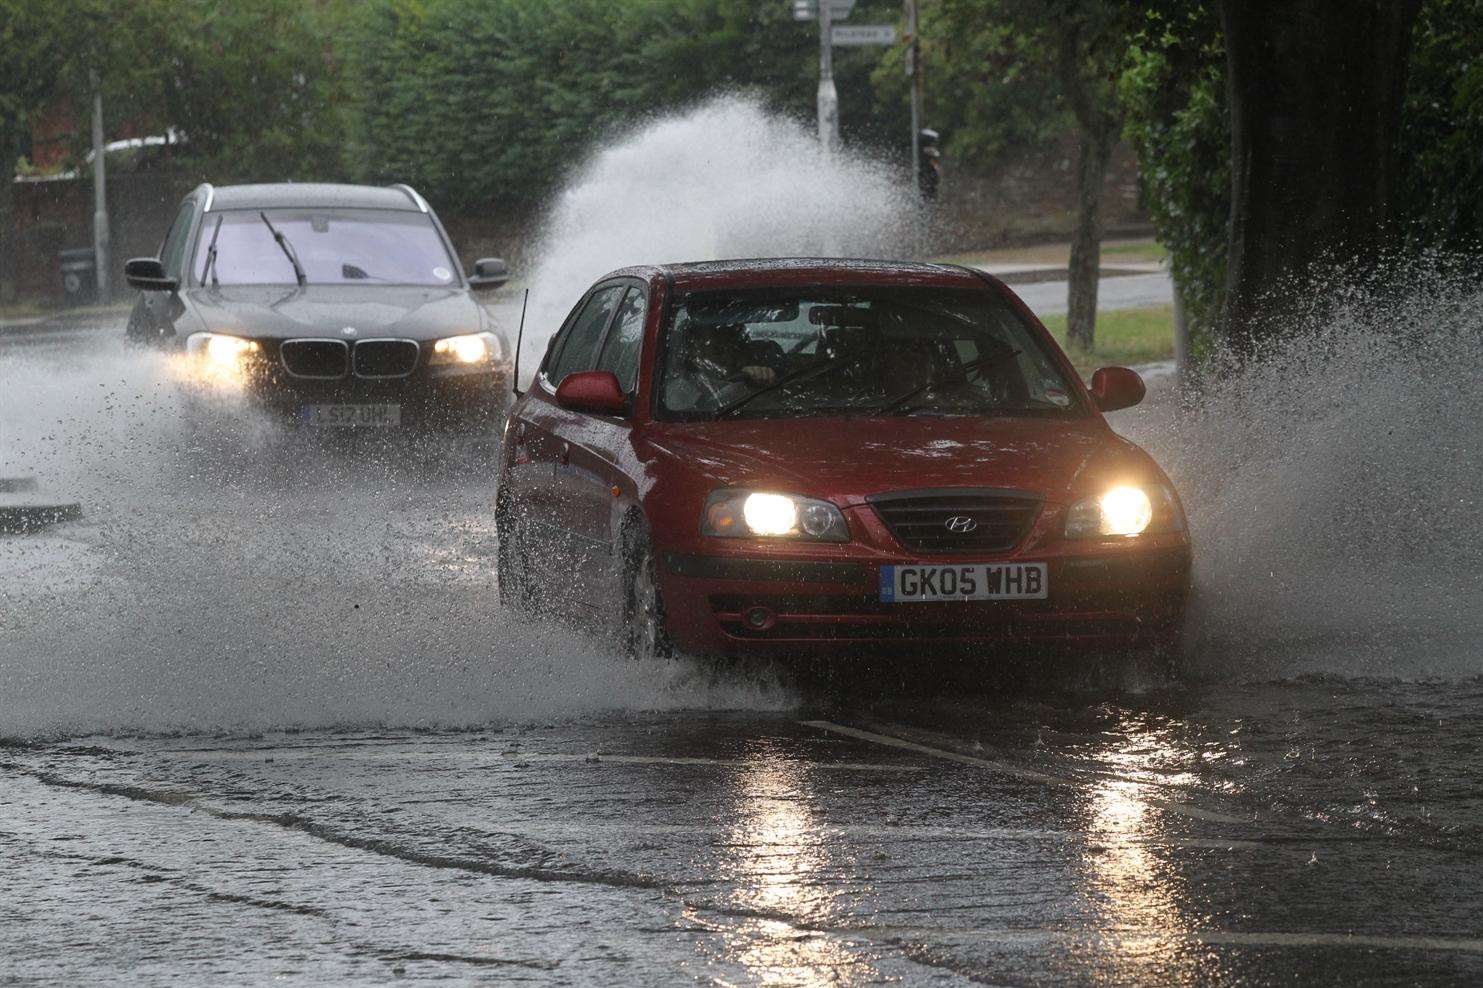 Cars travel through a flooded area on Bell Road, Sittingbourne